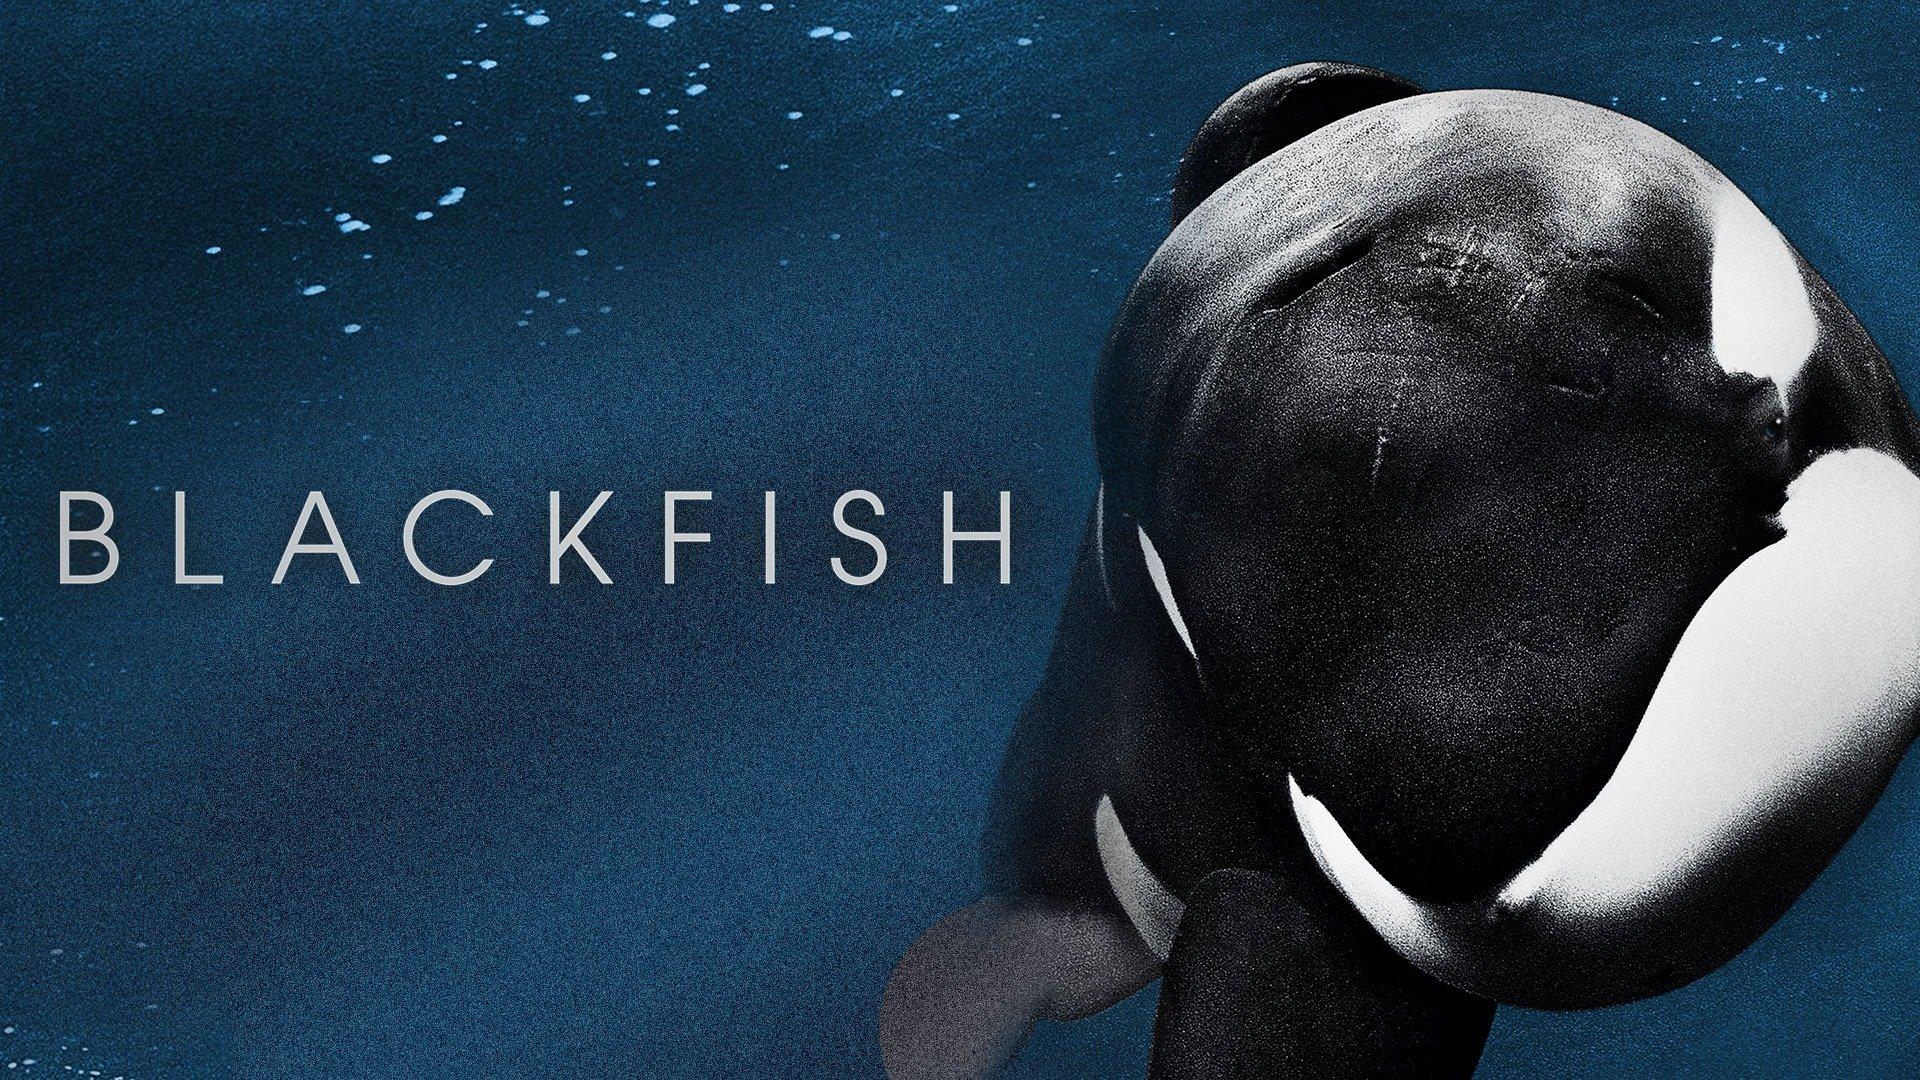 Watch Blackfish Streaming Online on Philo (Free Trial)